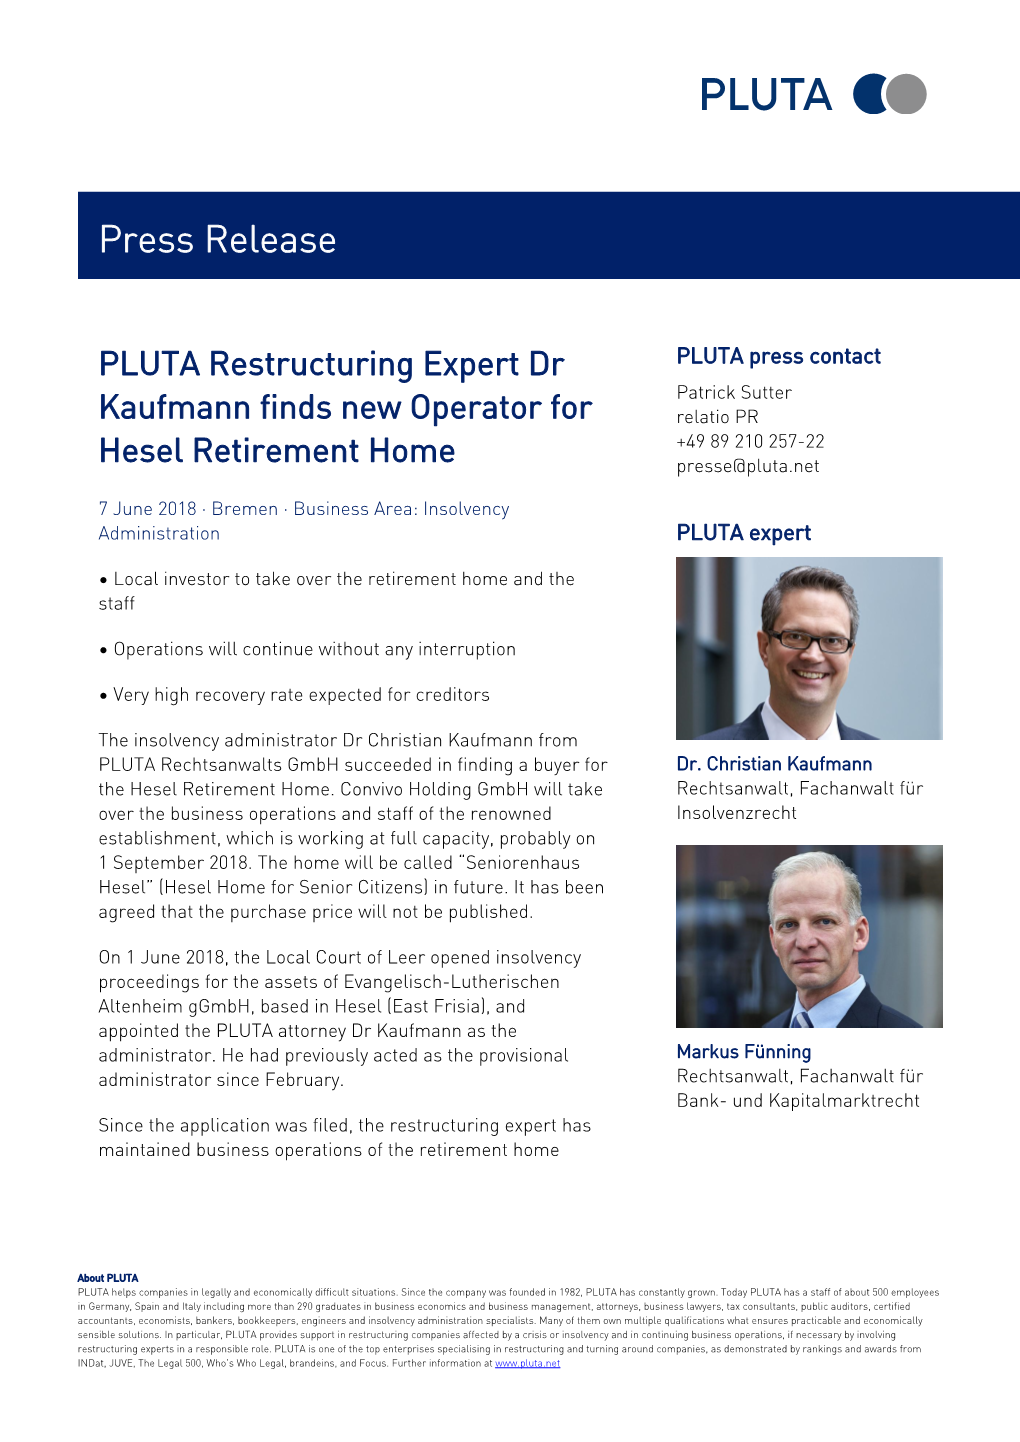 PLUTA Restructuring Expert Dr Kaufmann Finds New Operator for Hesel Retirement Home